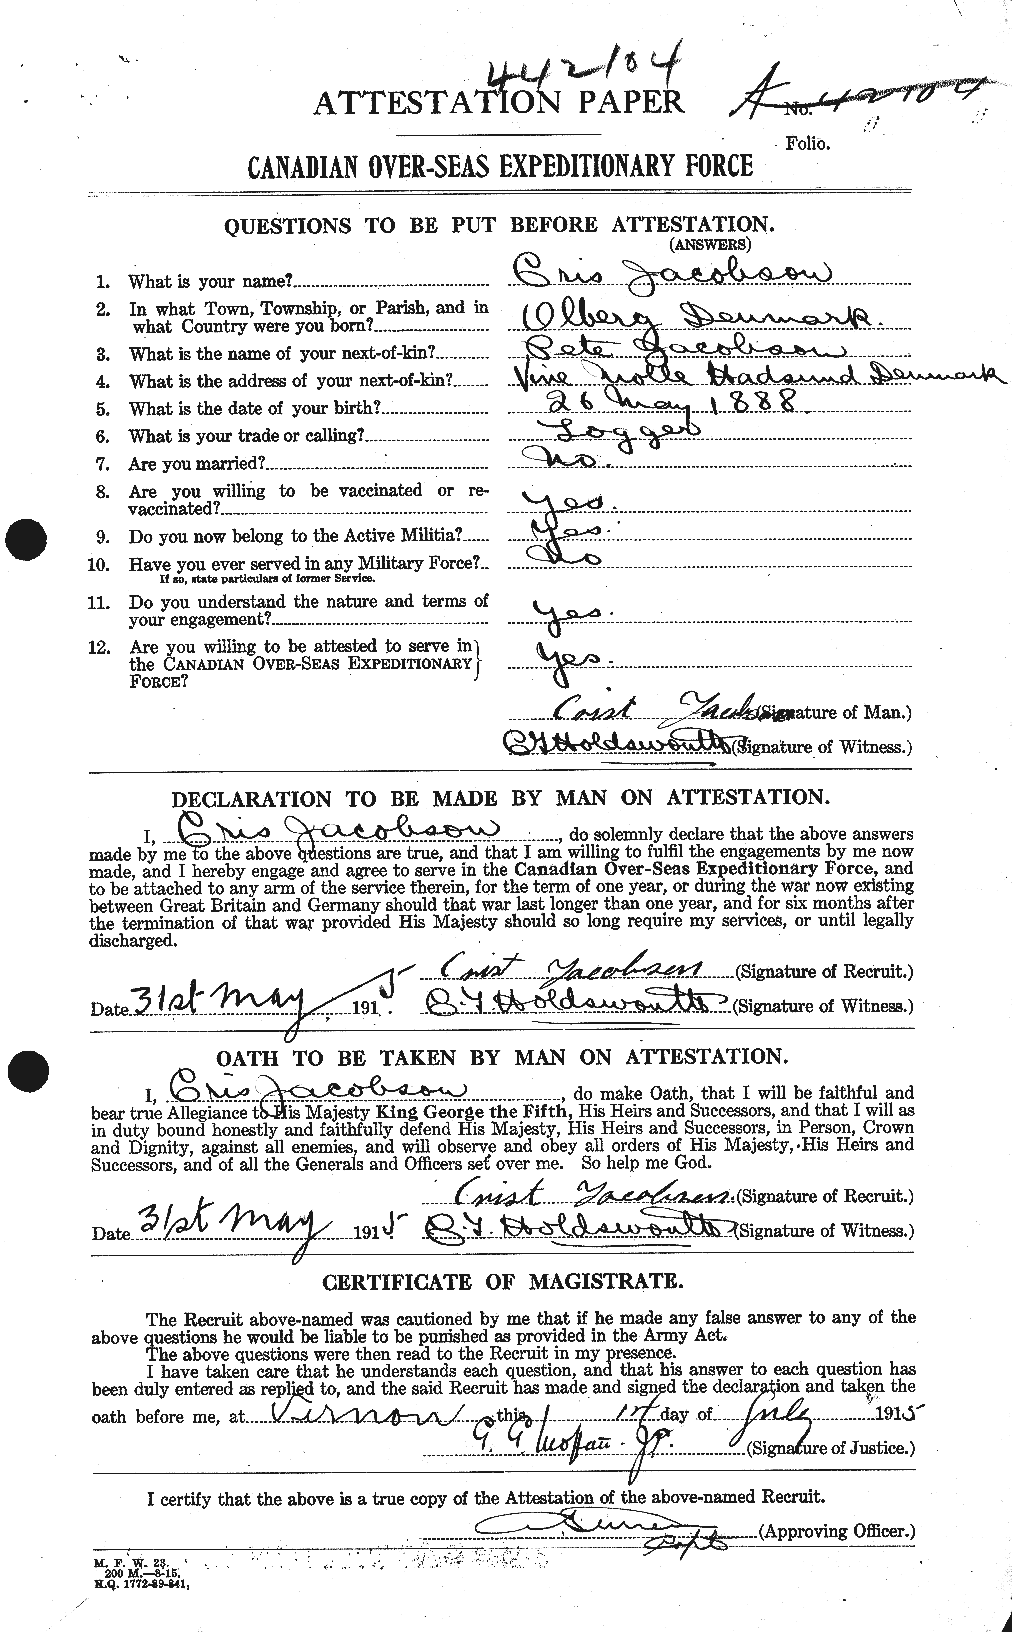 Personnel Records of the First World War - CEF 416952a